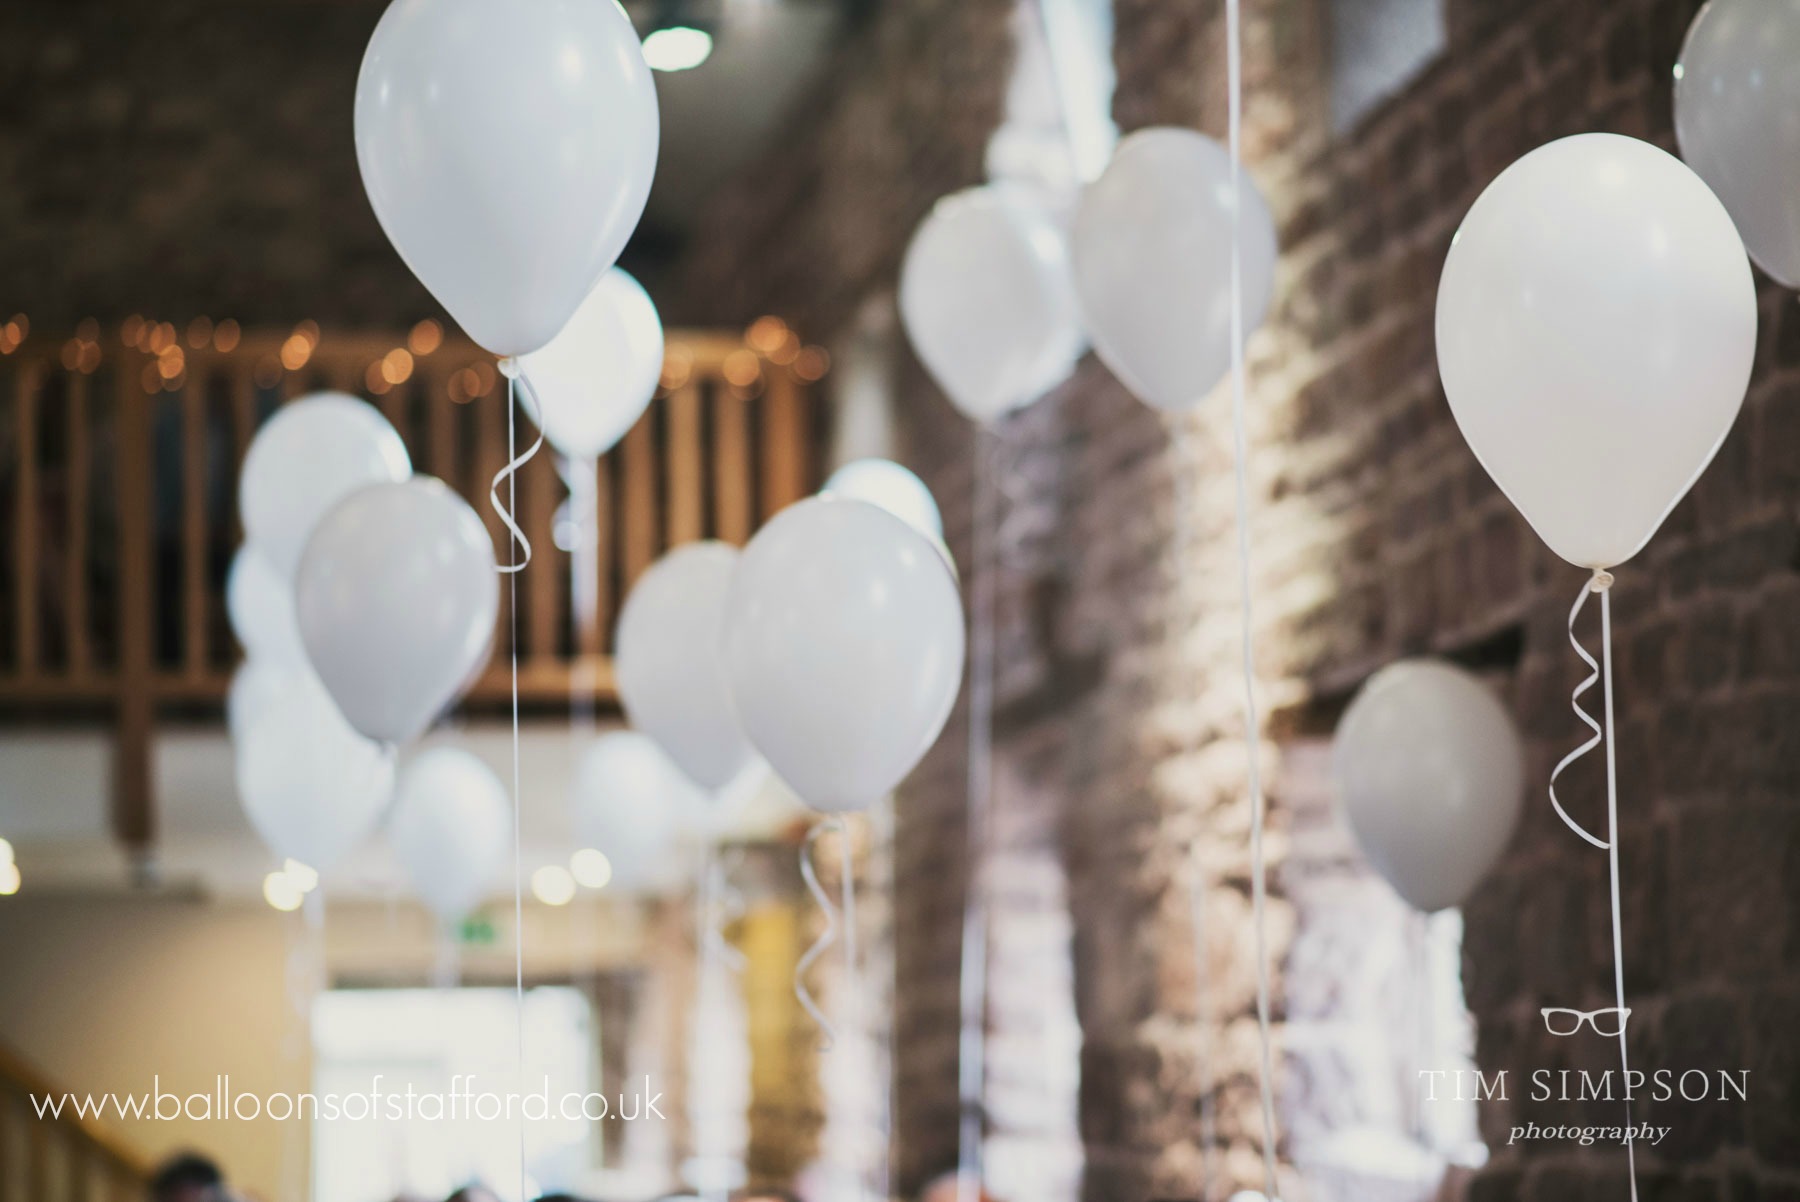 Helium filled white wedding balloons at The Ashes Wedding Venue